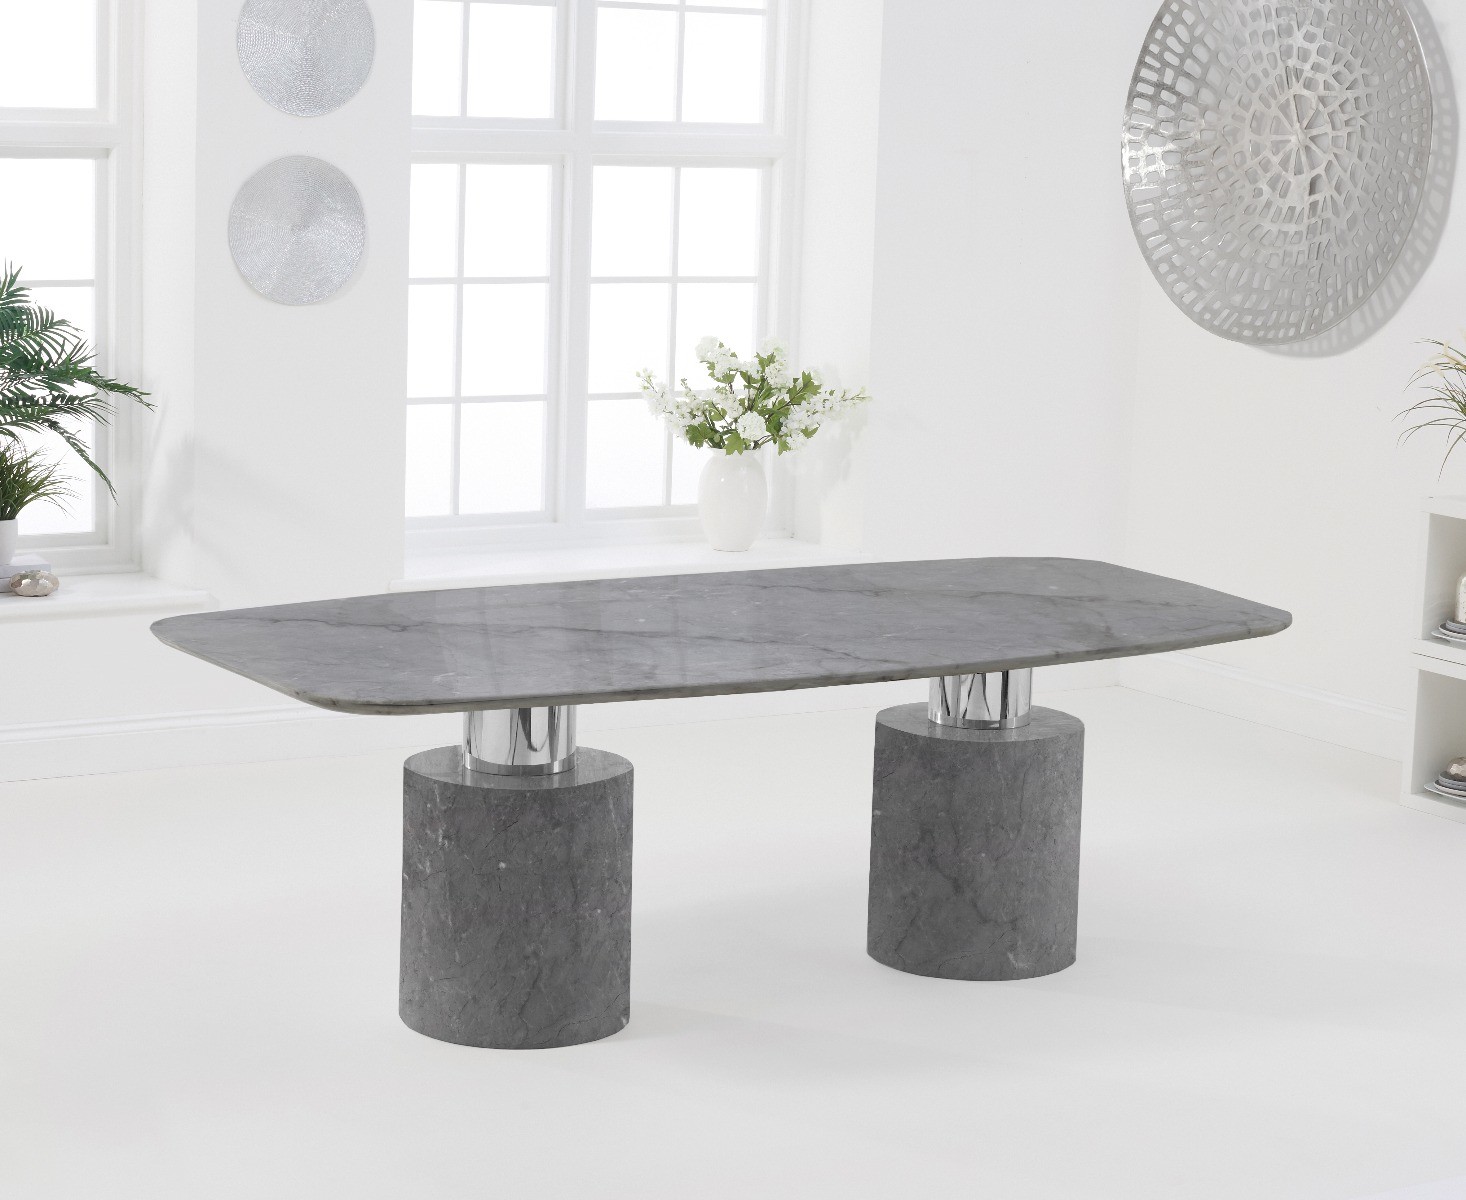 Photo 4 of Antonio 220cm grey marble dining table with 8 grey sophia chairs